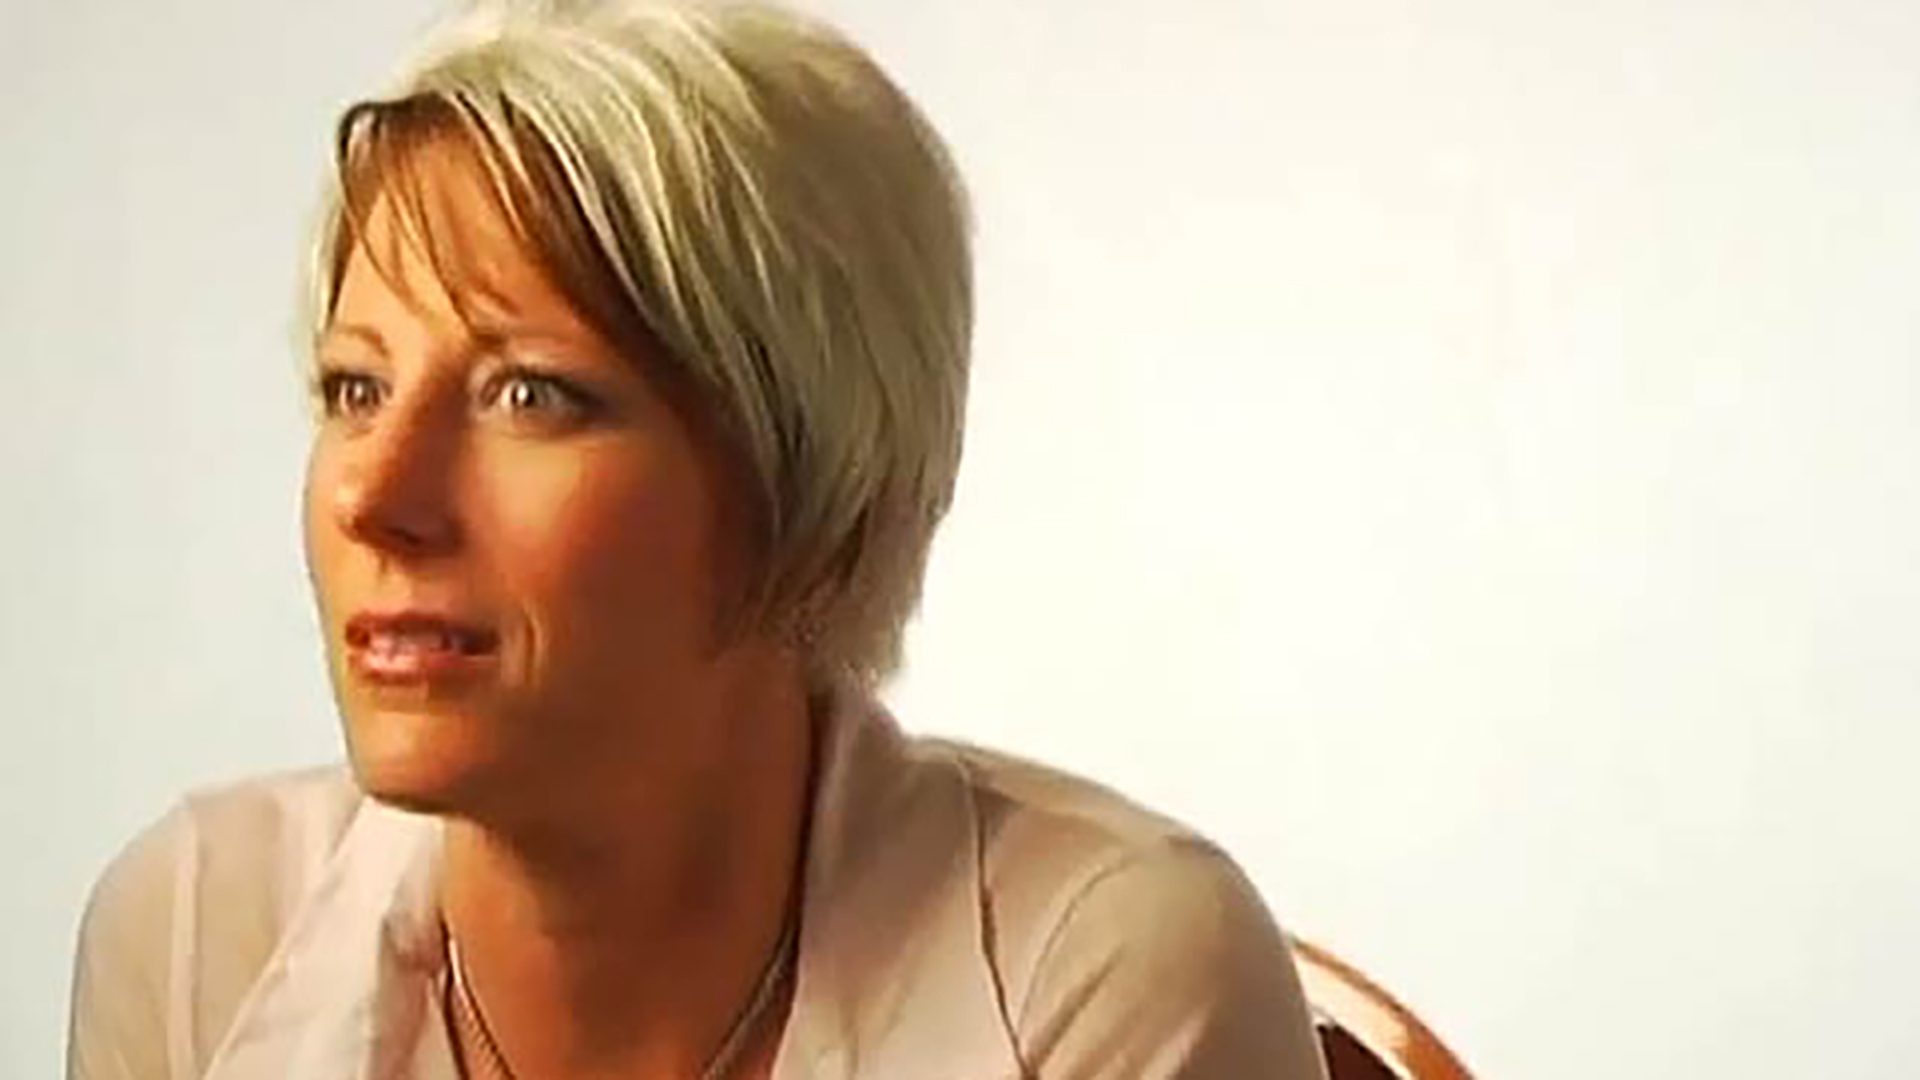 A woman with short blonde hair wearing a white shirt is interviewed against a white background.